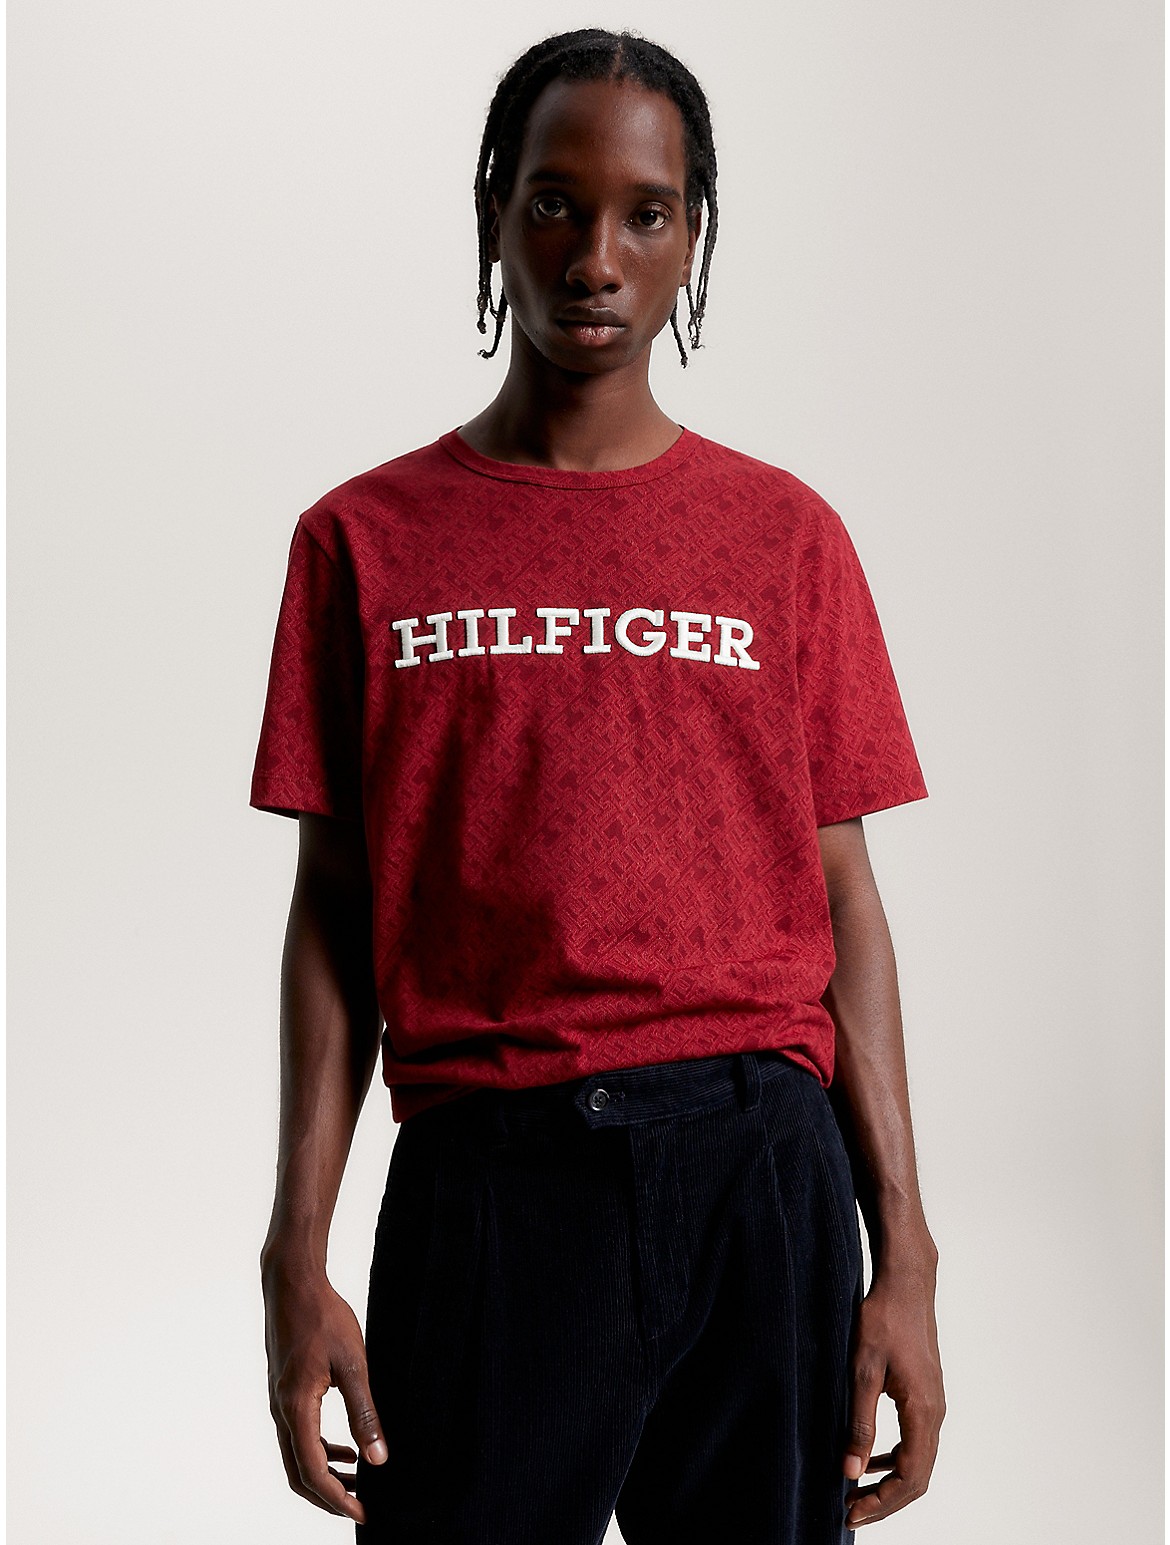 Tommy Hilfiger Men's Allover TH Embroidered Monotype T-Shirt